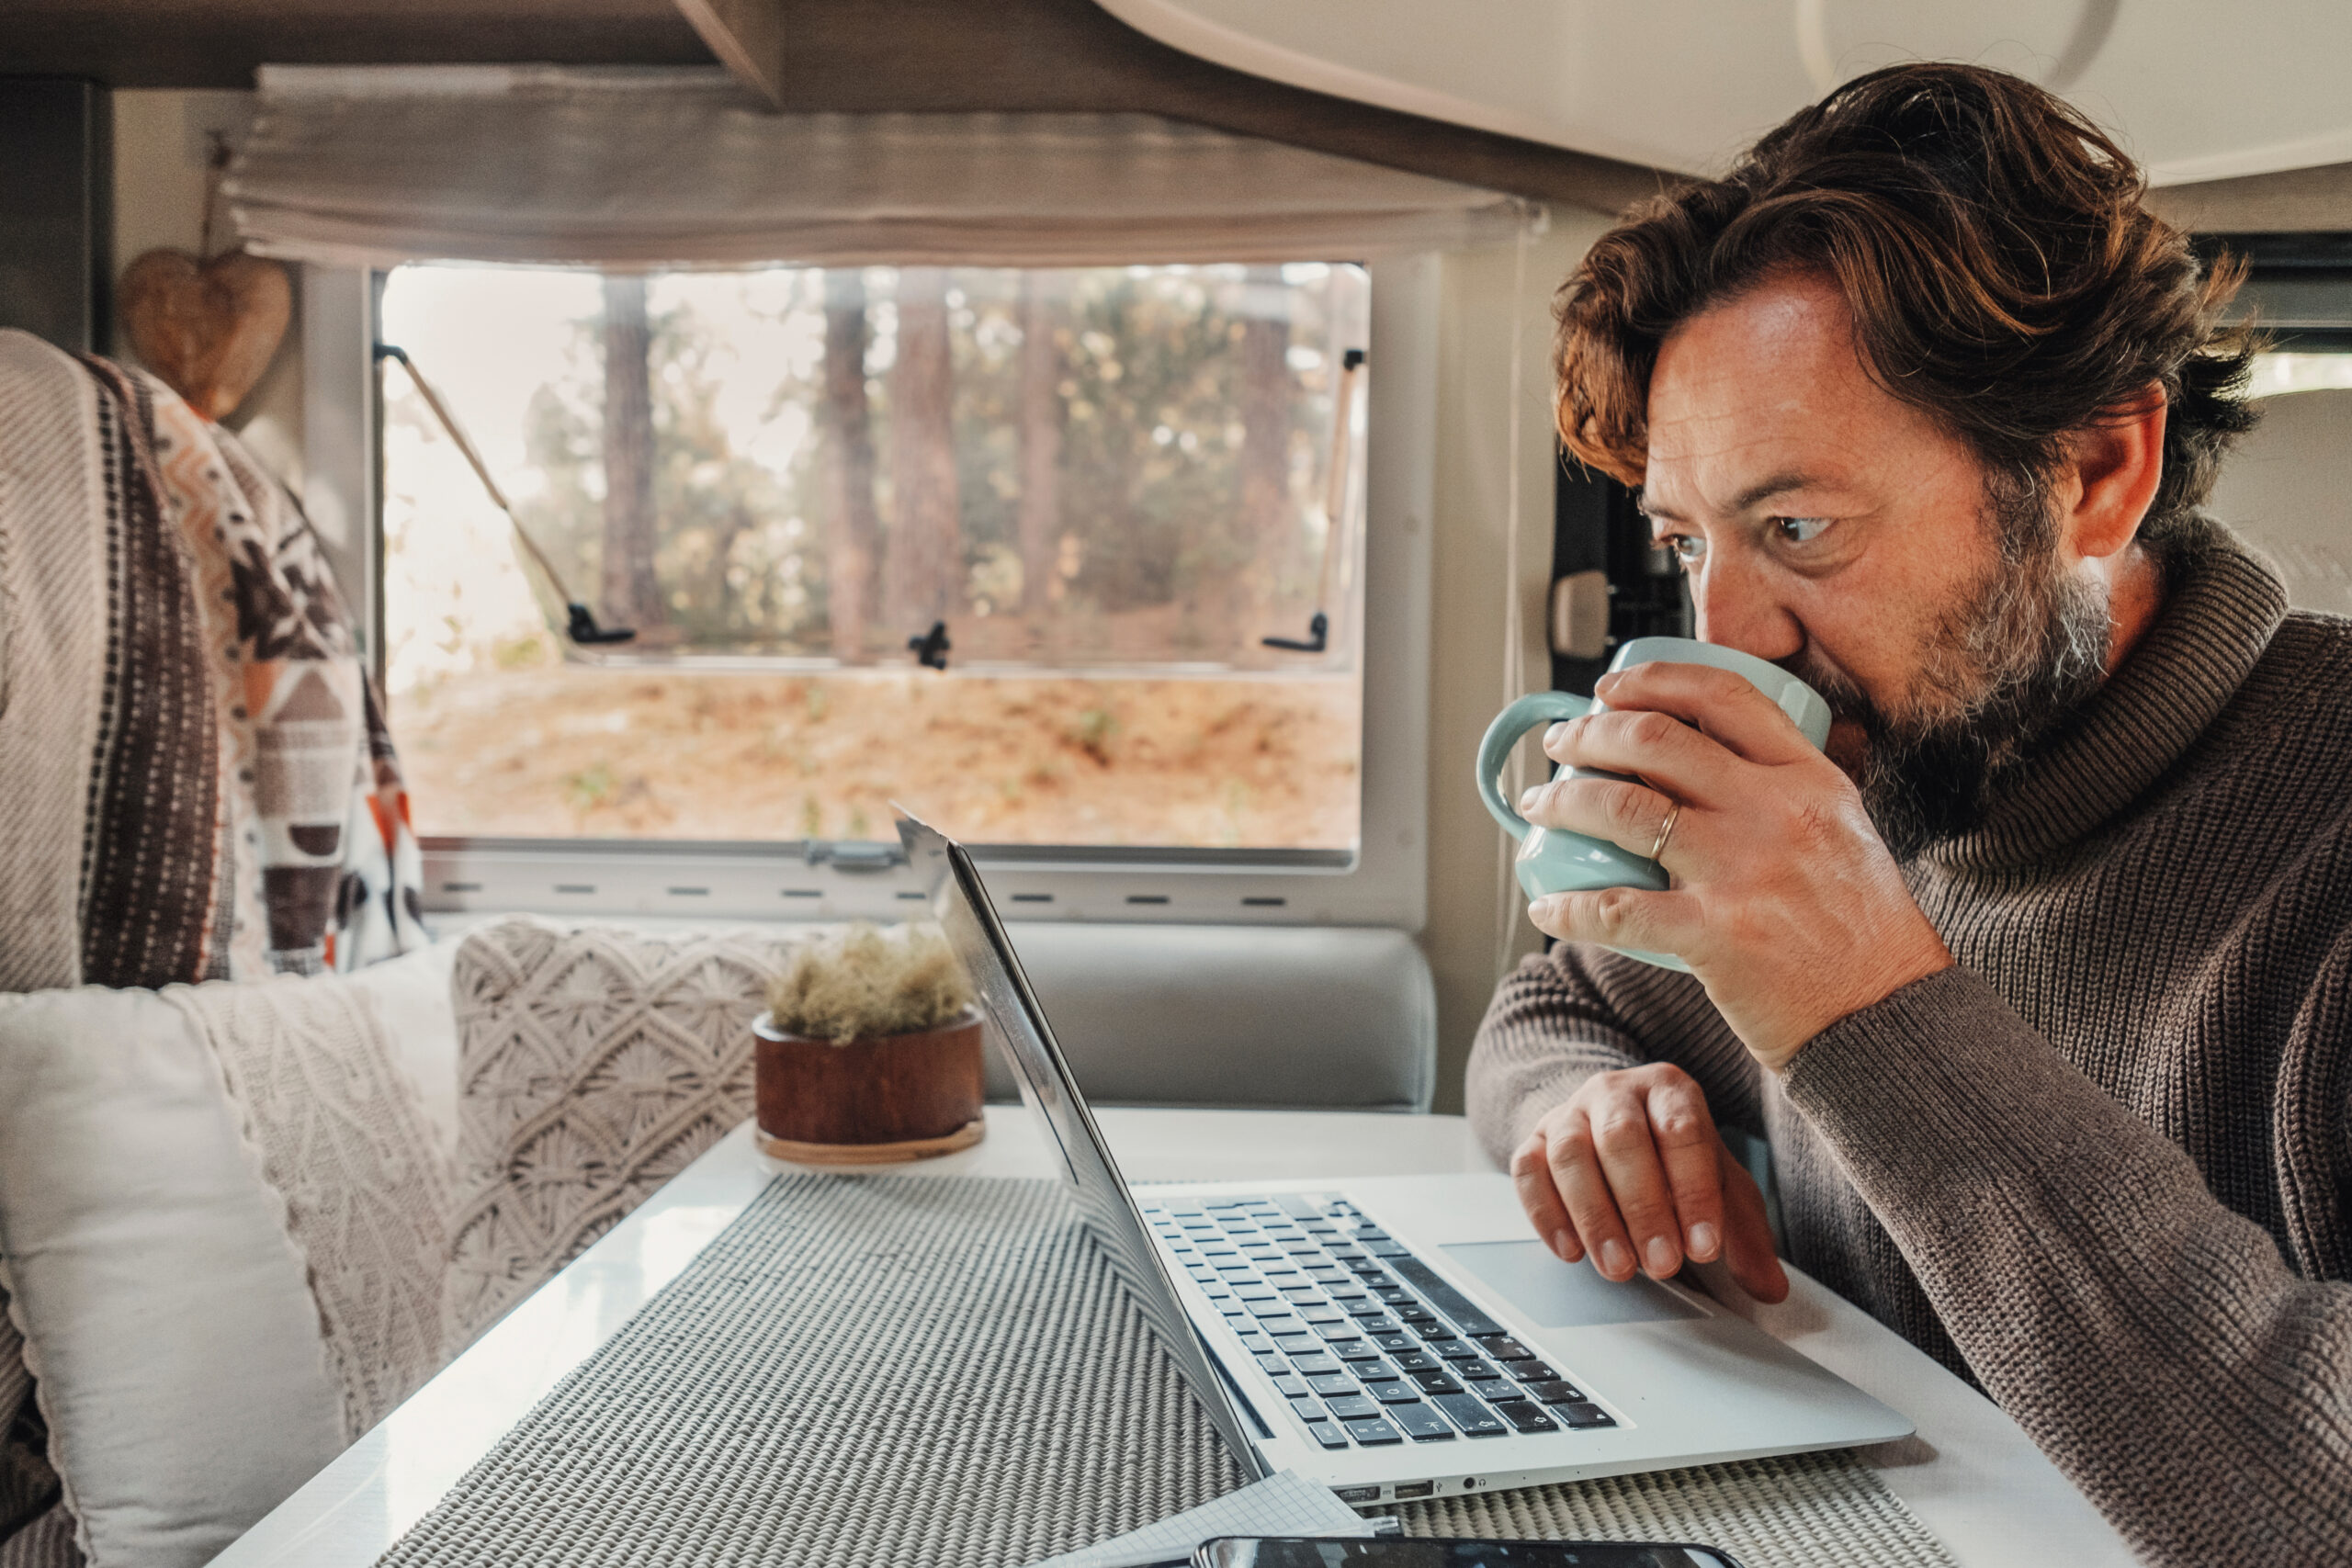 Mature man working on laptop computer inside a camper van with n